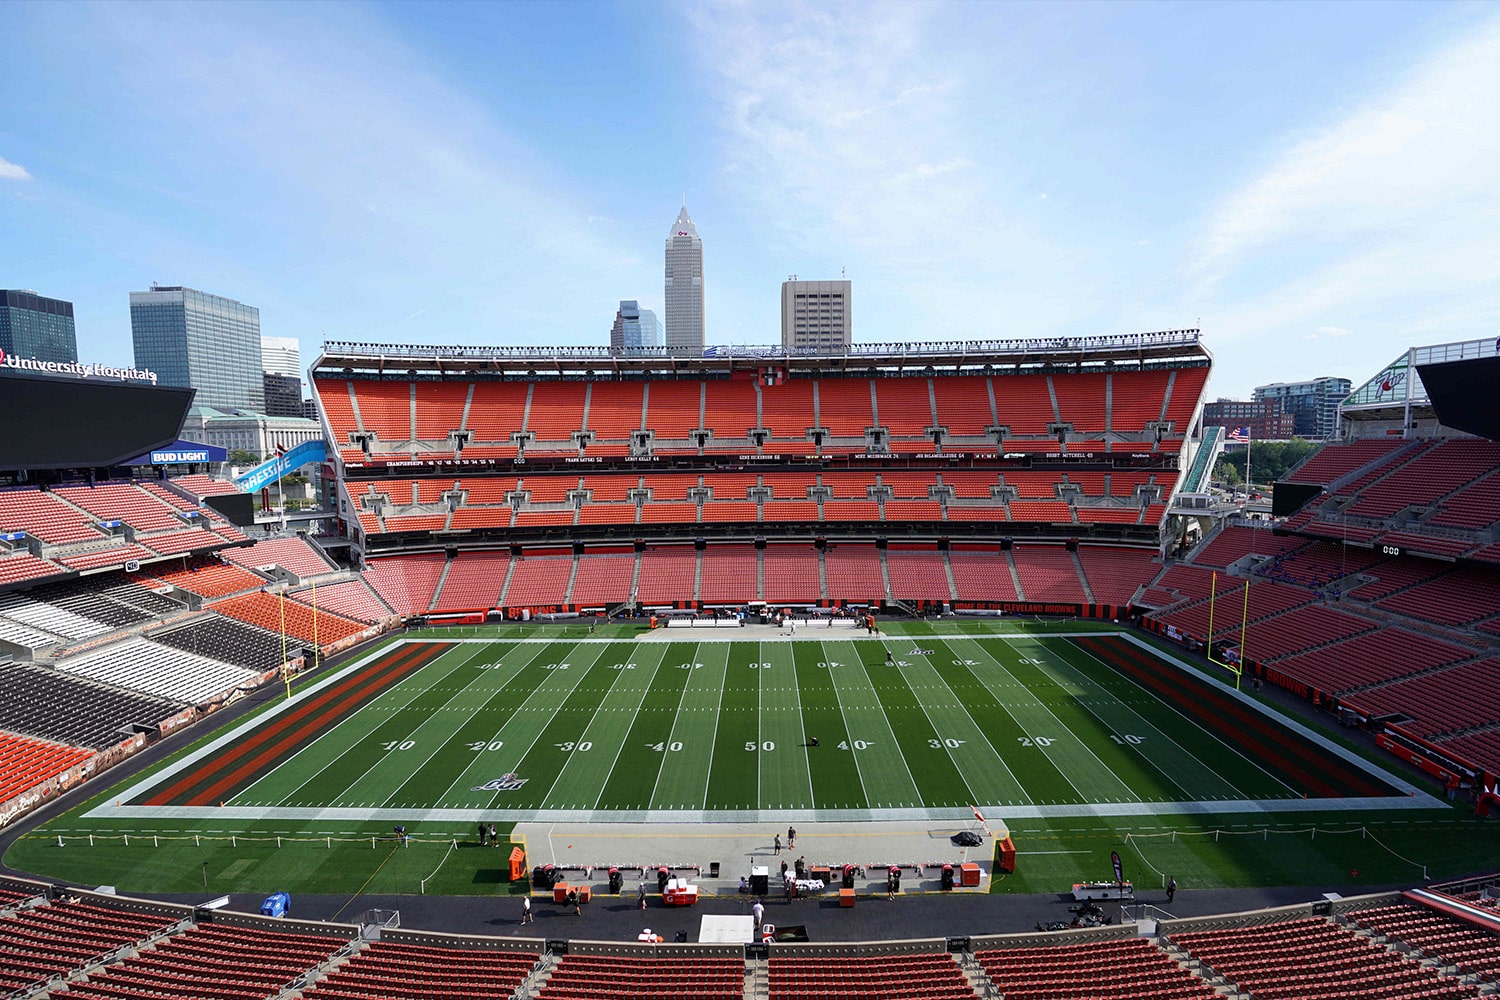 cleveland browns suite prices